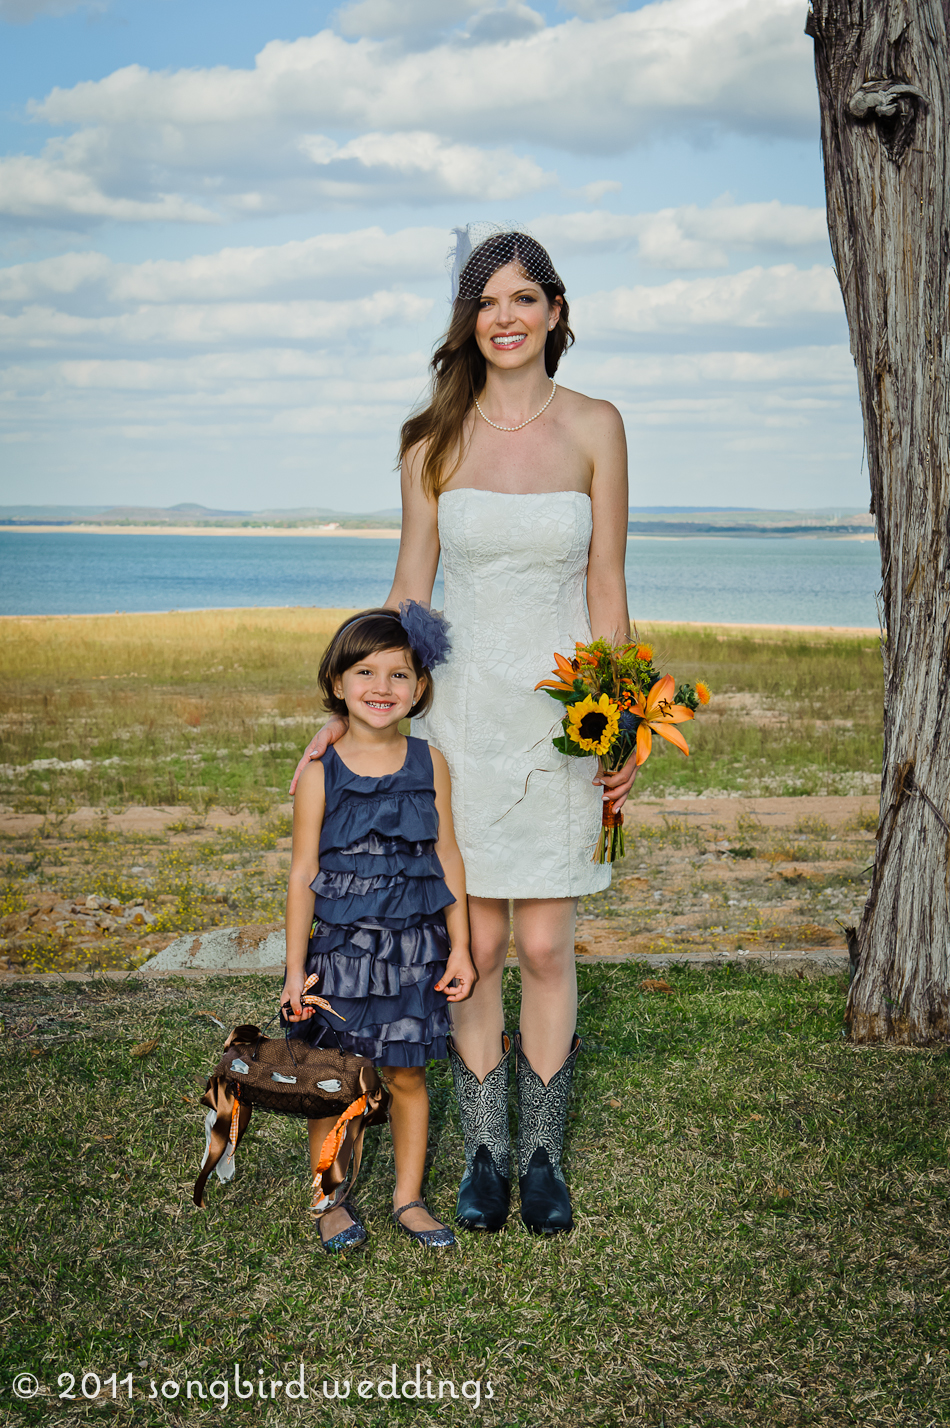 Family portrait of bride with child next to lake holding bouquet